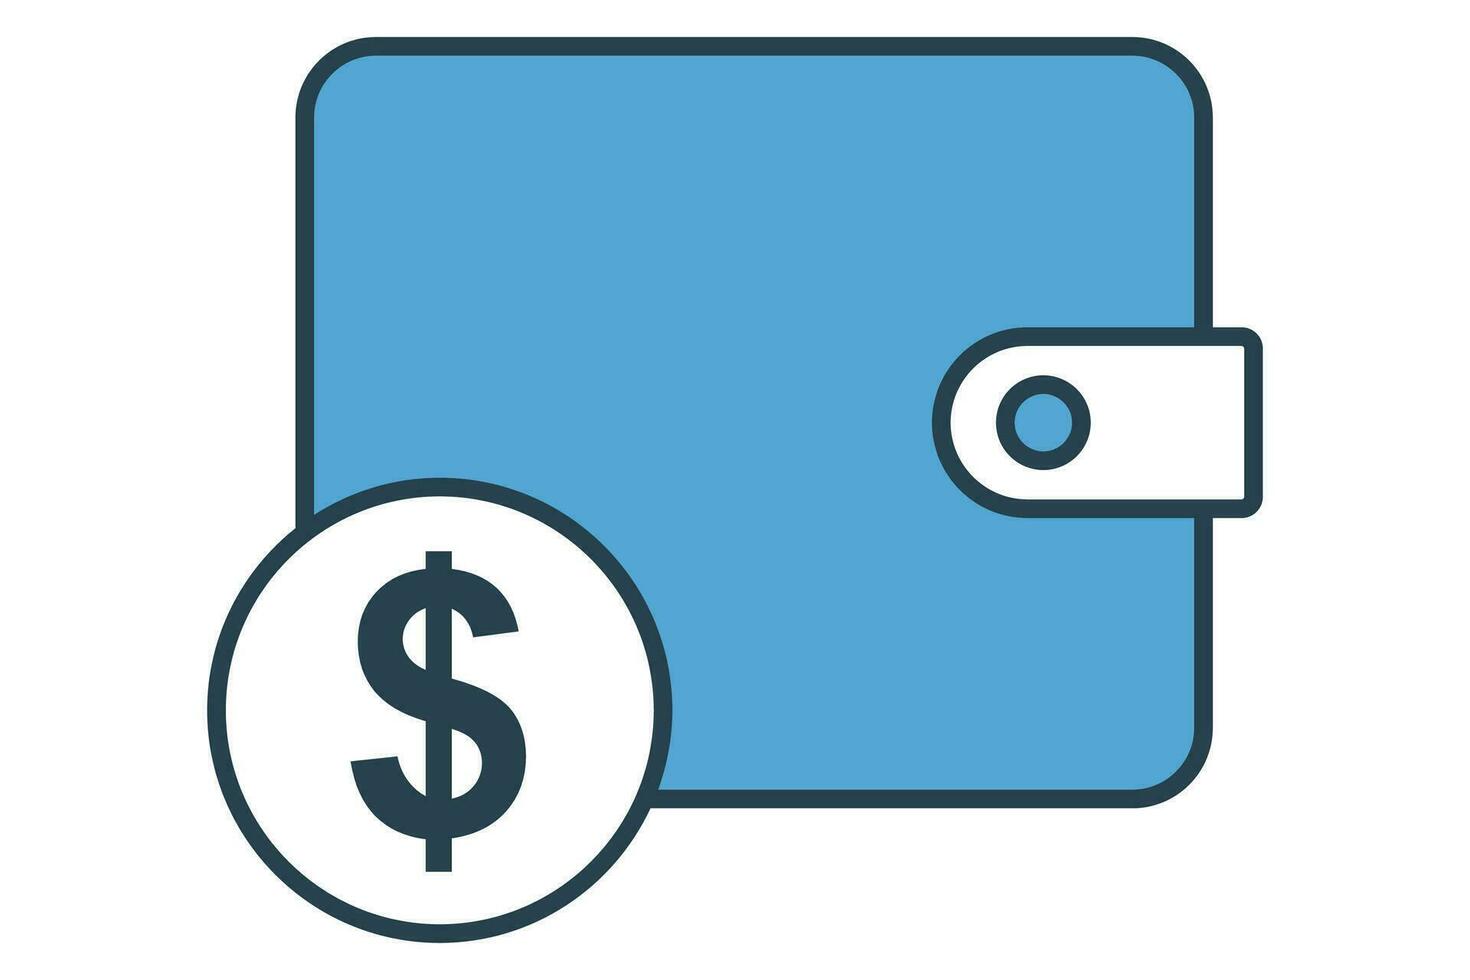 wallet icon. wallet with dollar. icon related to finance. flat line icon style. element illustration vector